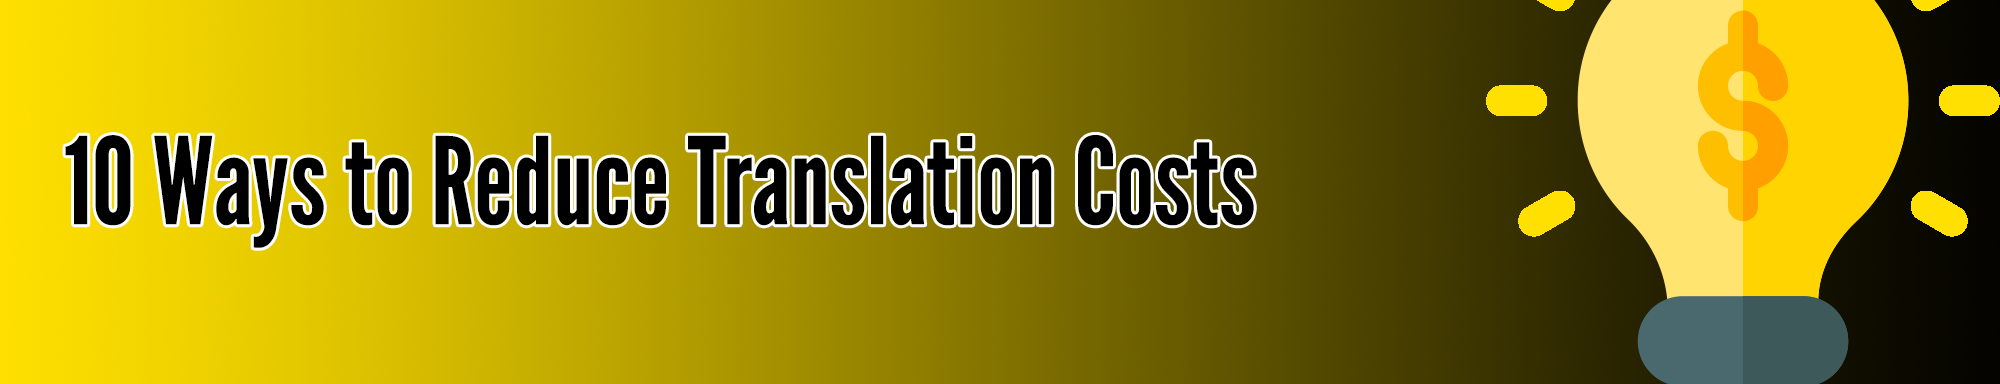 10 Tips to Reduce Translation Costs